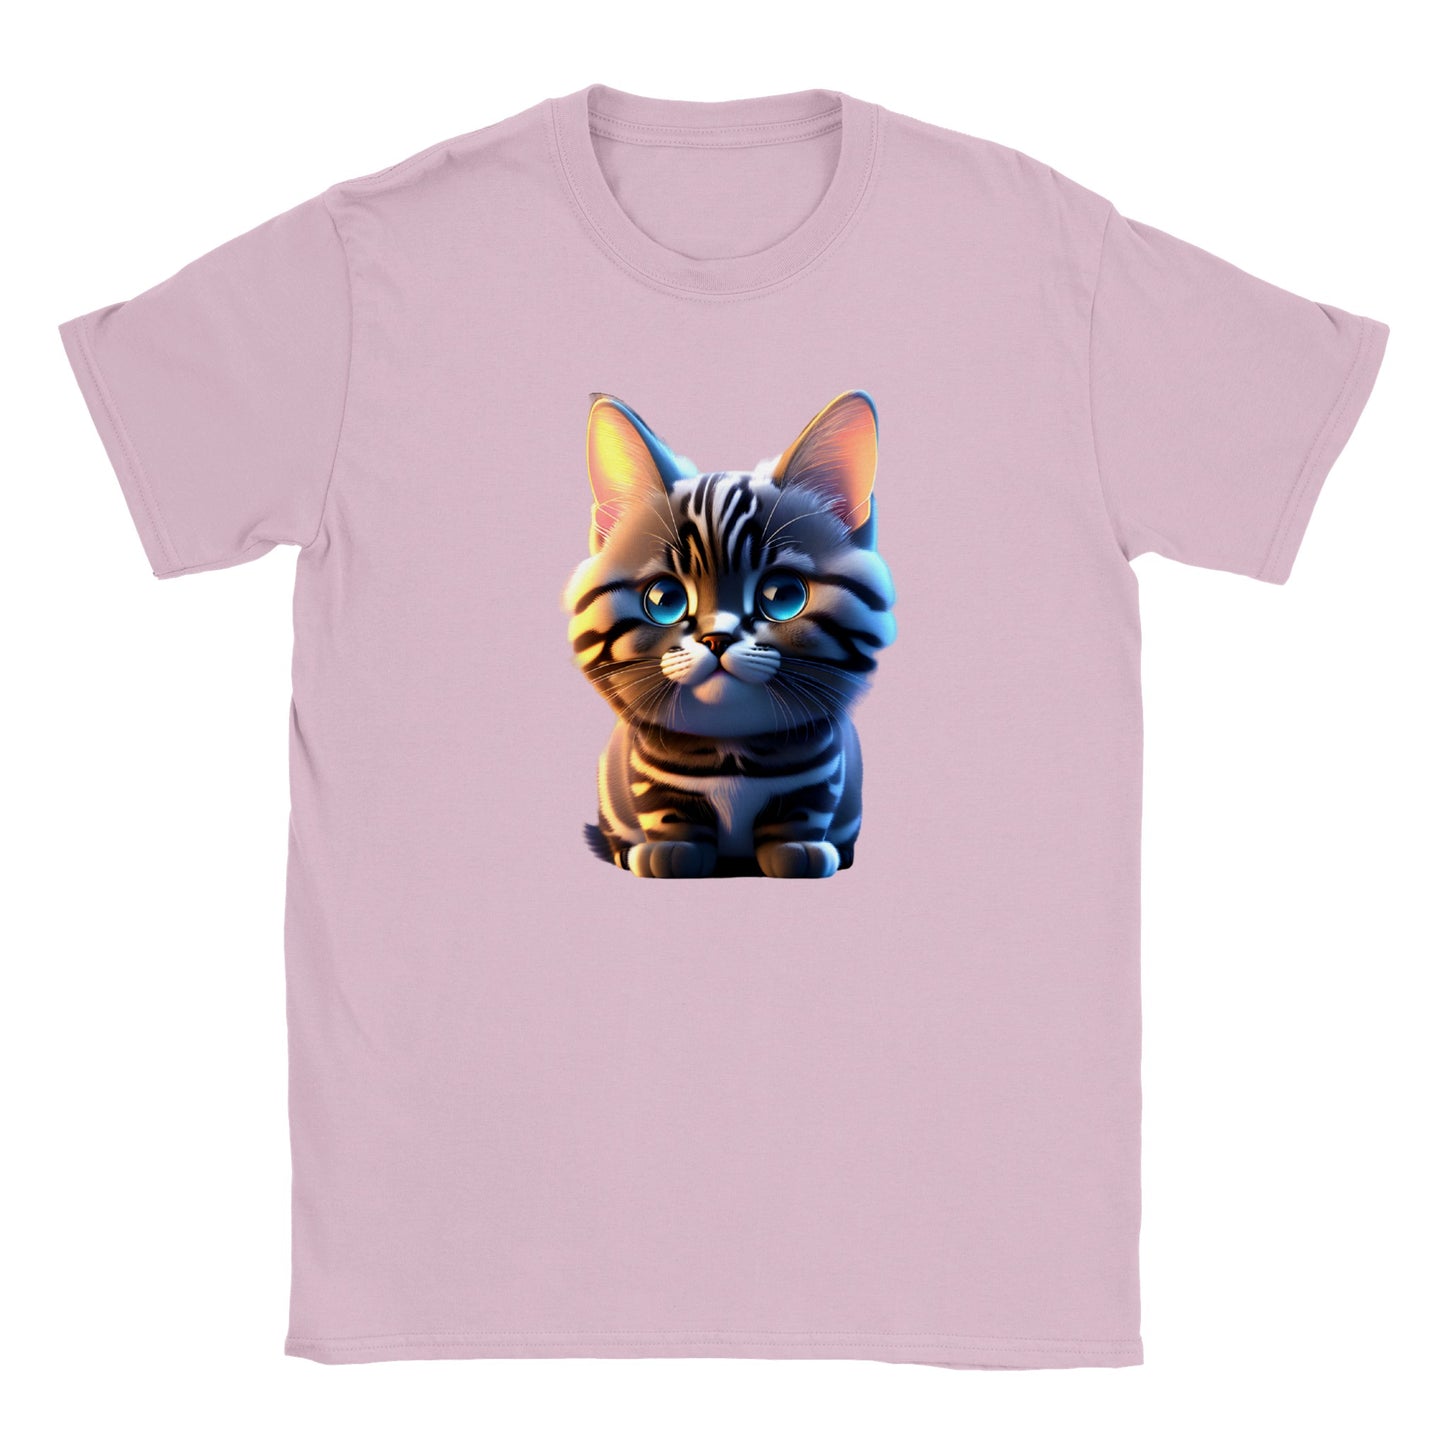 Adorable, Cool, Cute Cats and Kittens Toy - Classic Kids Crewneck T-Shirt 12